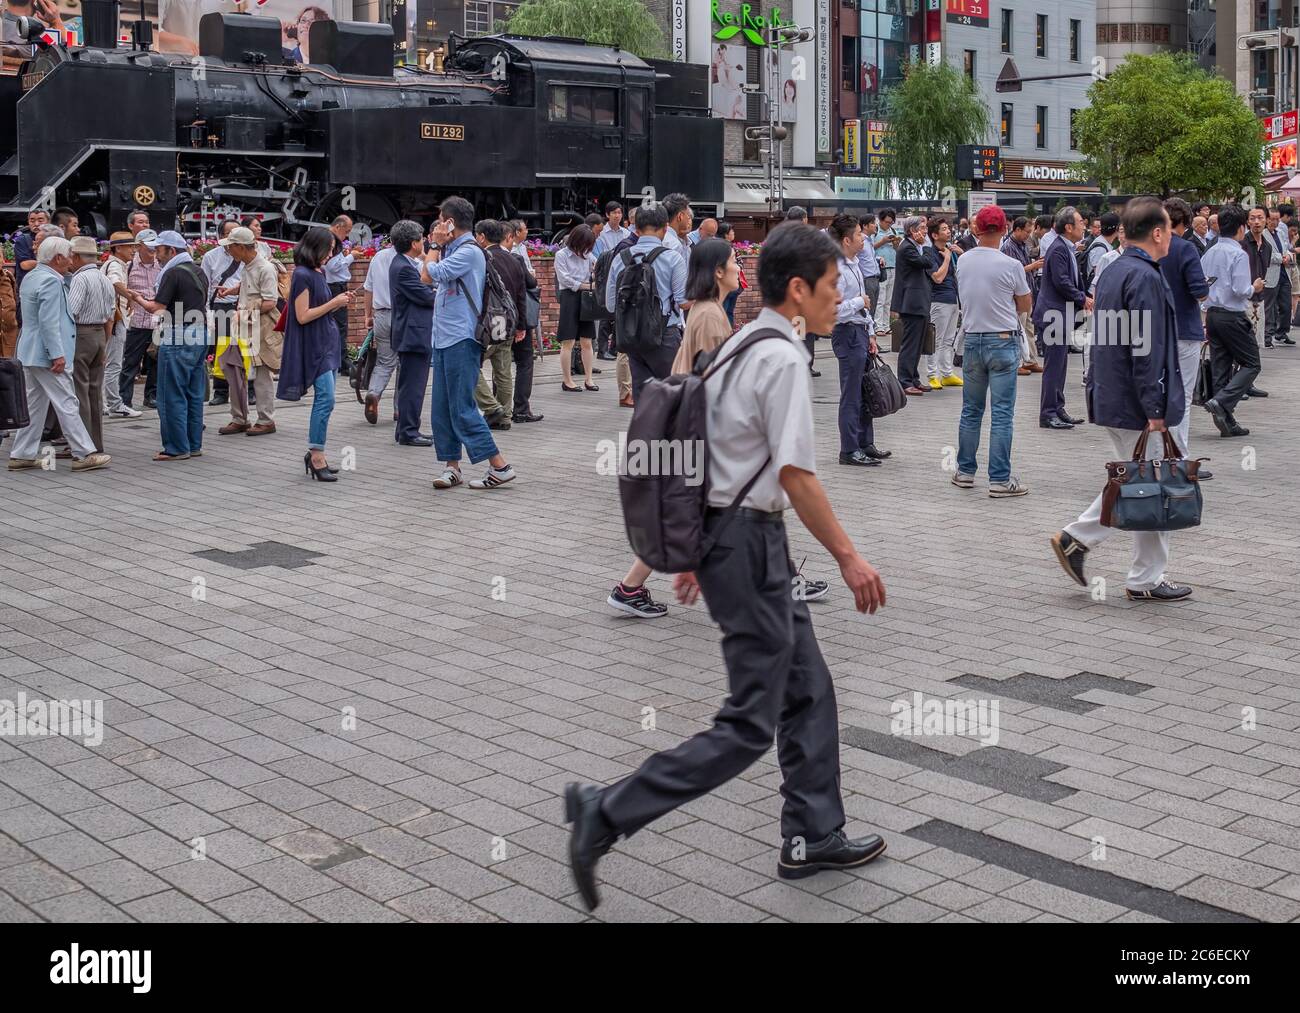 Steam Locomotive Japan High Resolution Stock Photography And Images Alamy